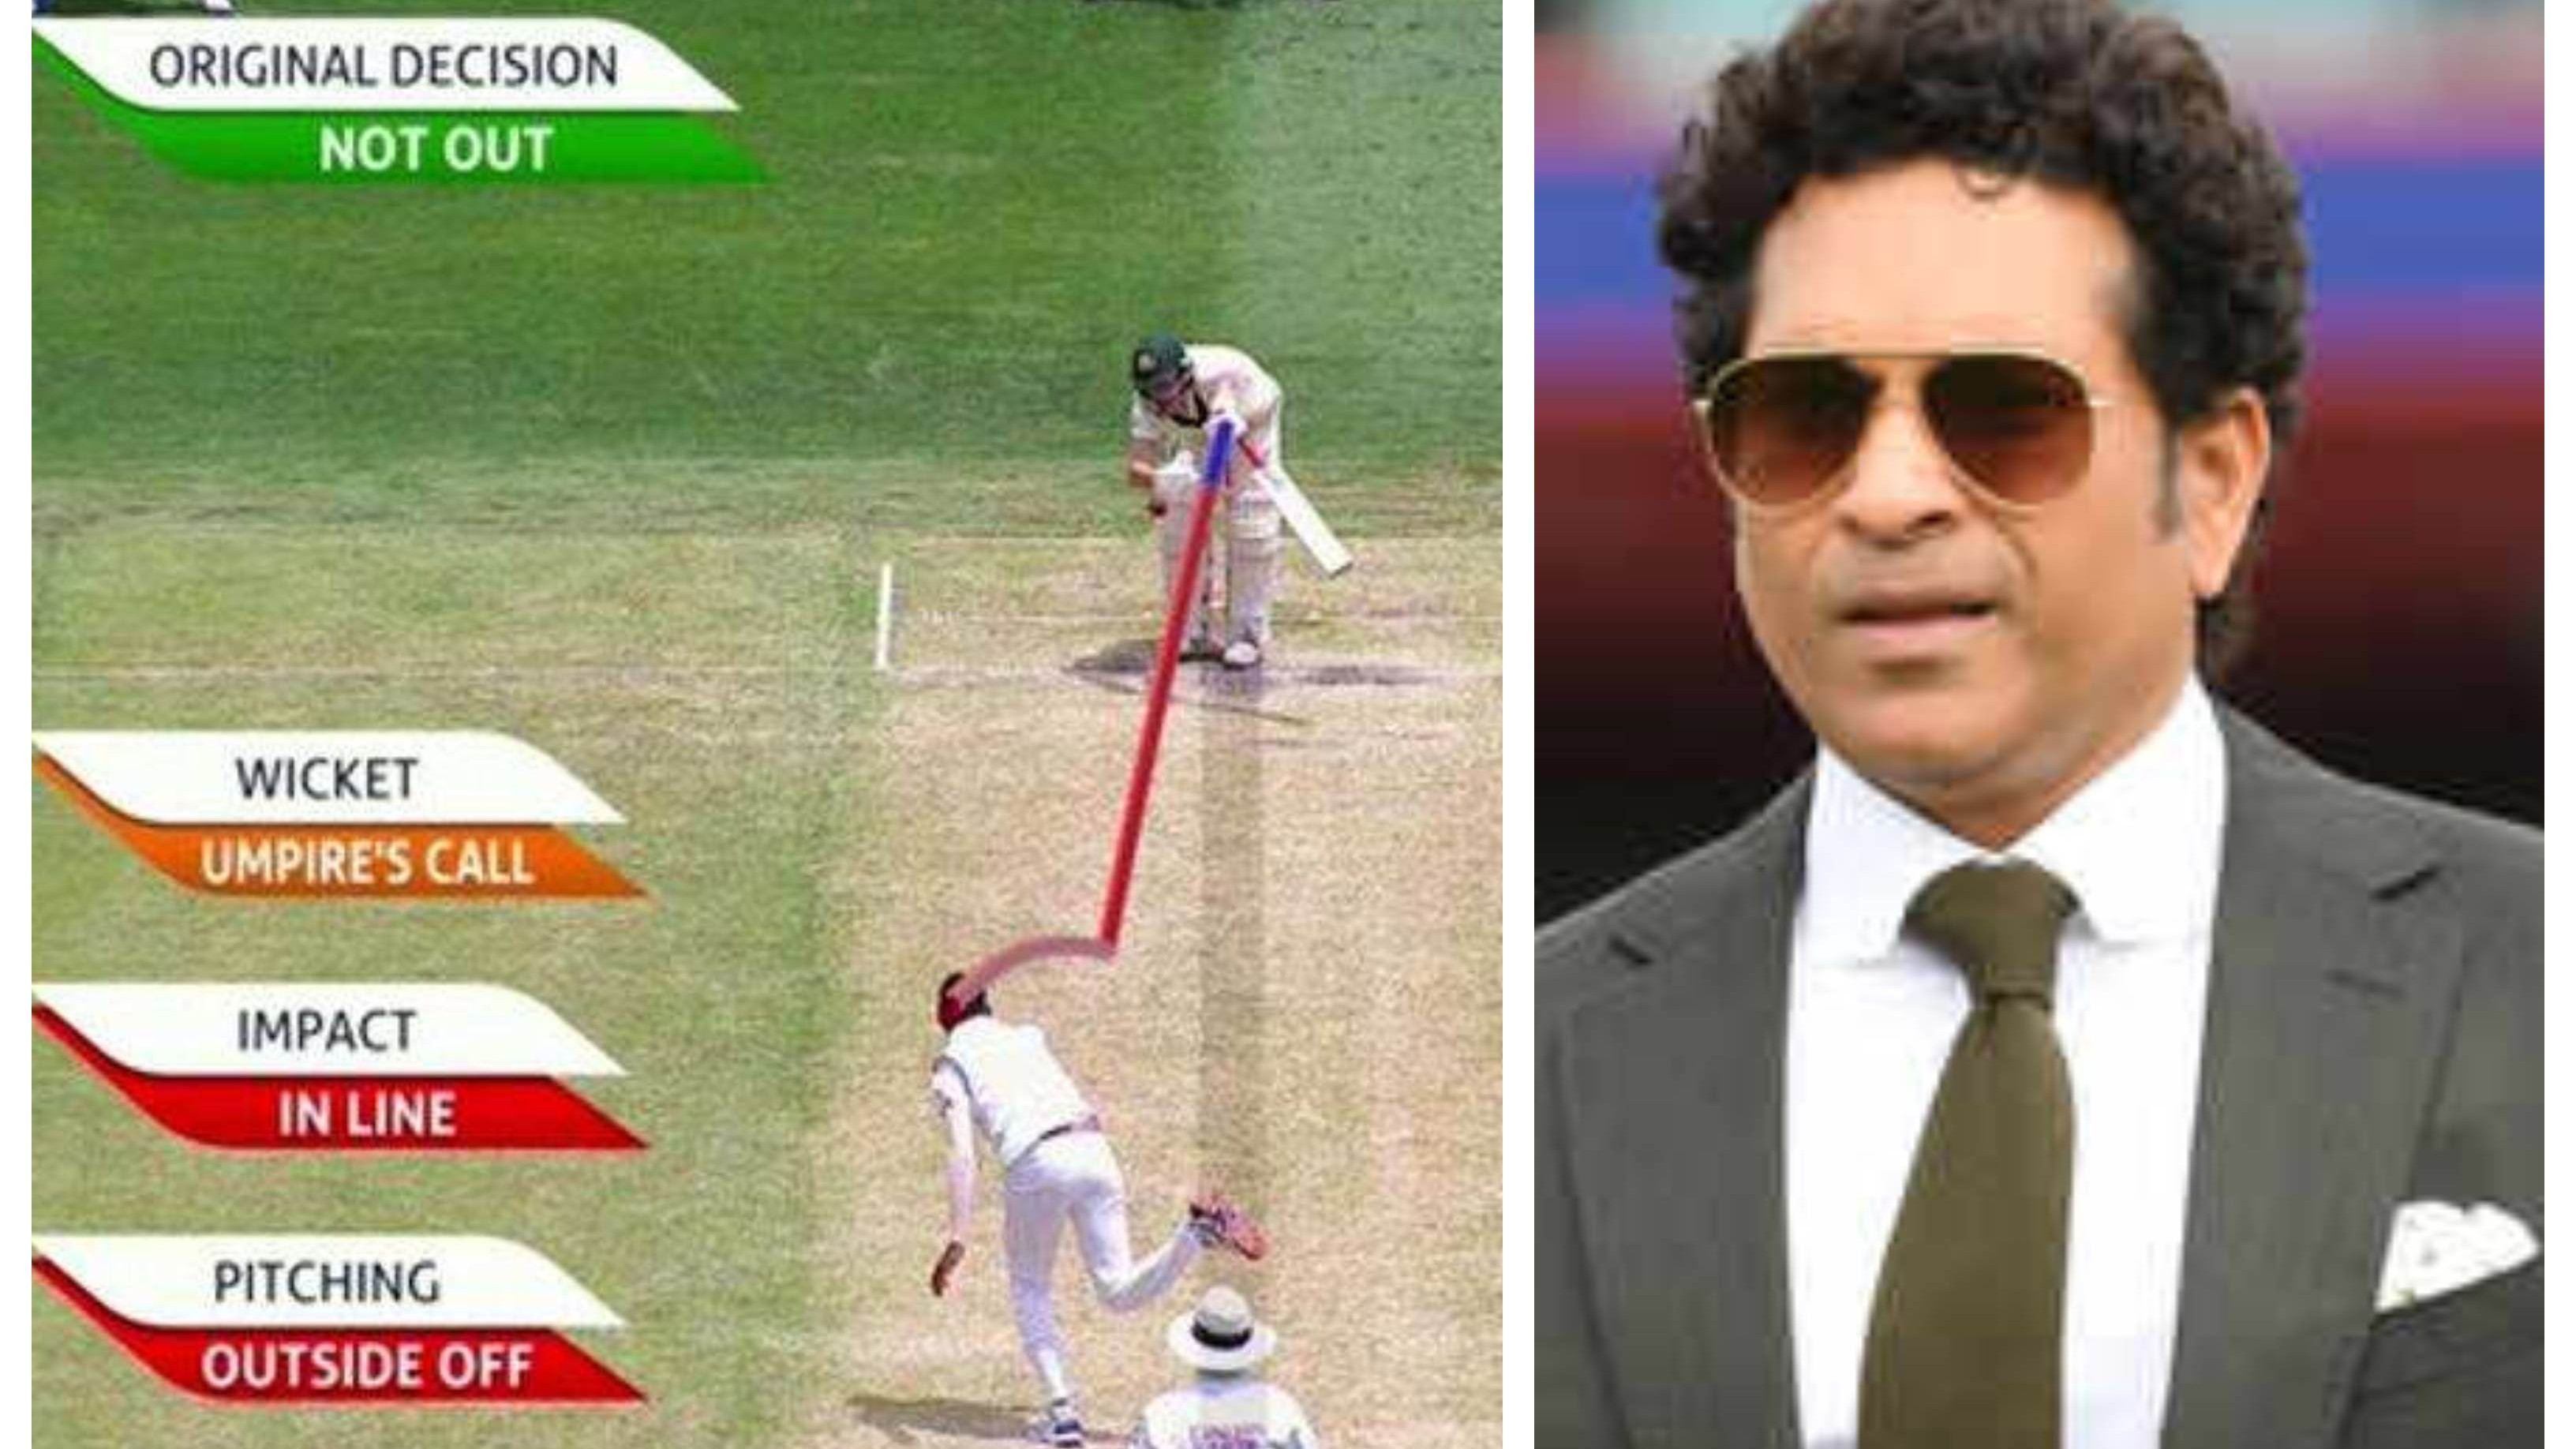 AUS v IND 2020-21: Sachin Tendulkar asks ICC to thoroughly look into ‘Umpires Call’ clause in DRS